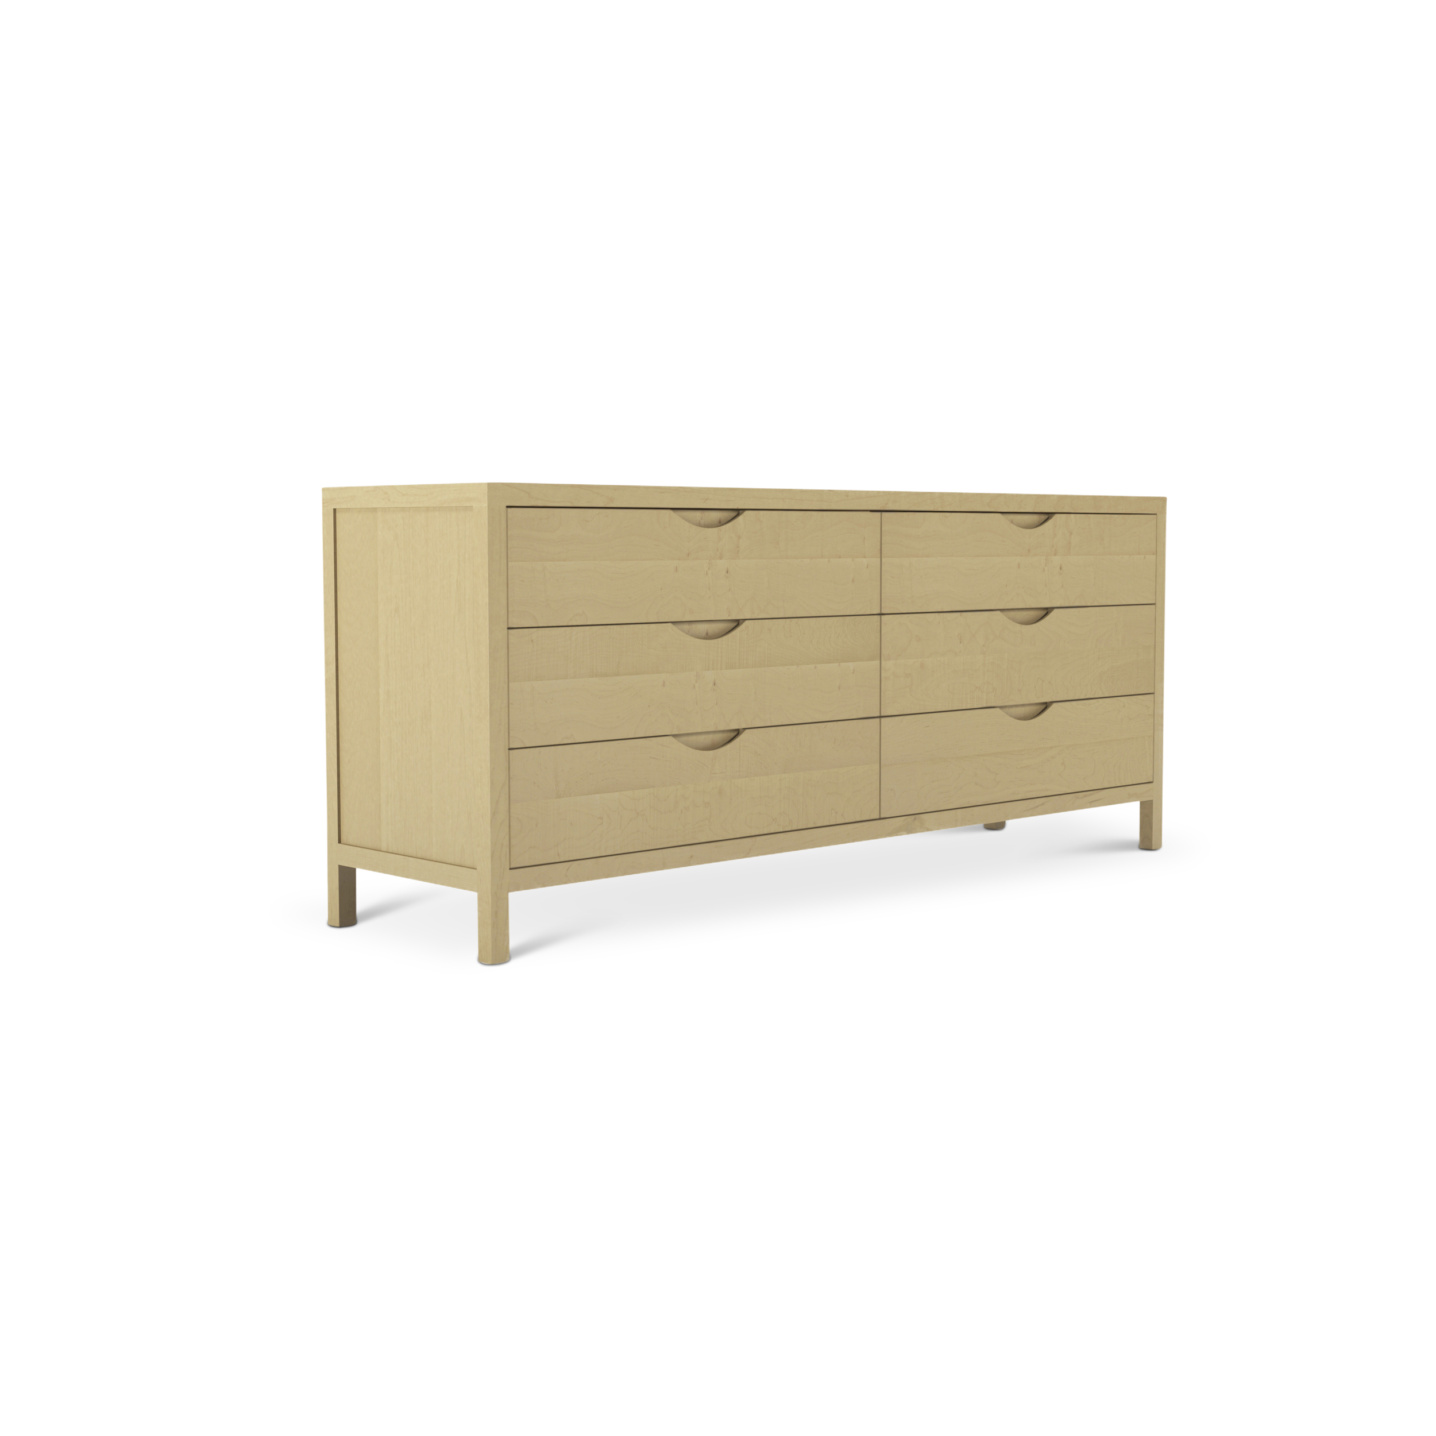 maple wood 72" dresser with six drawers